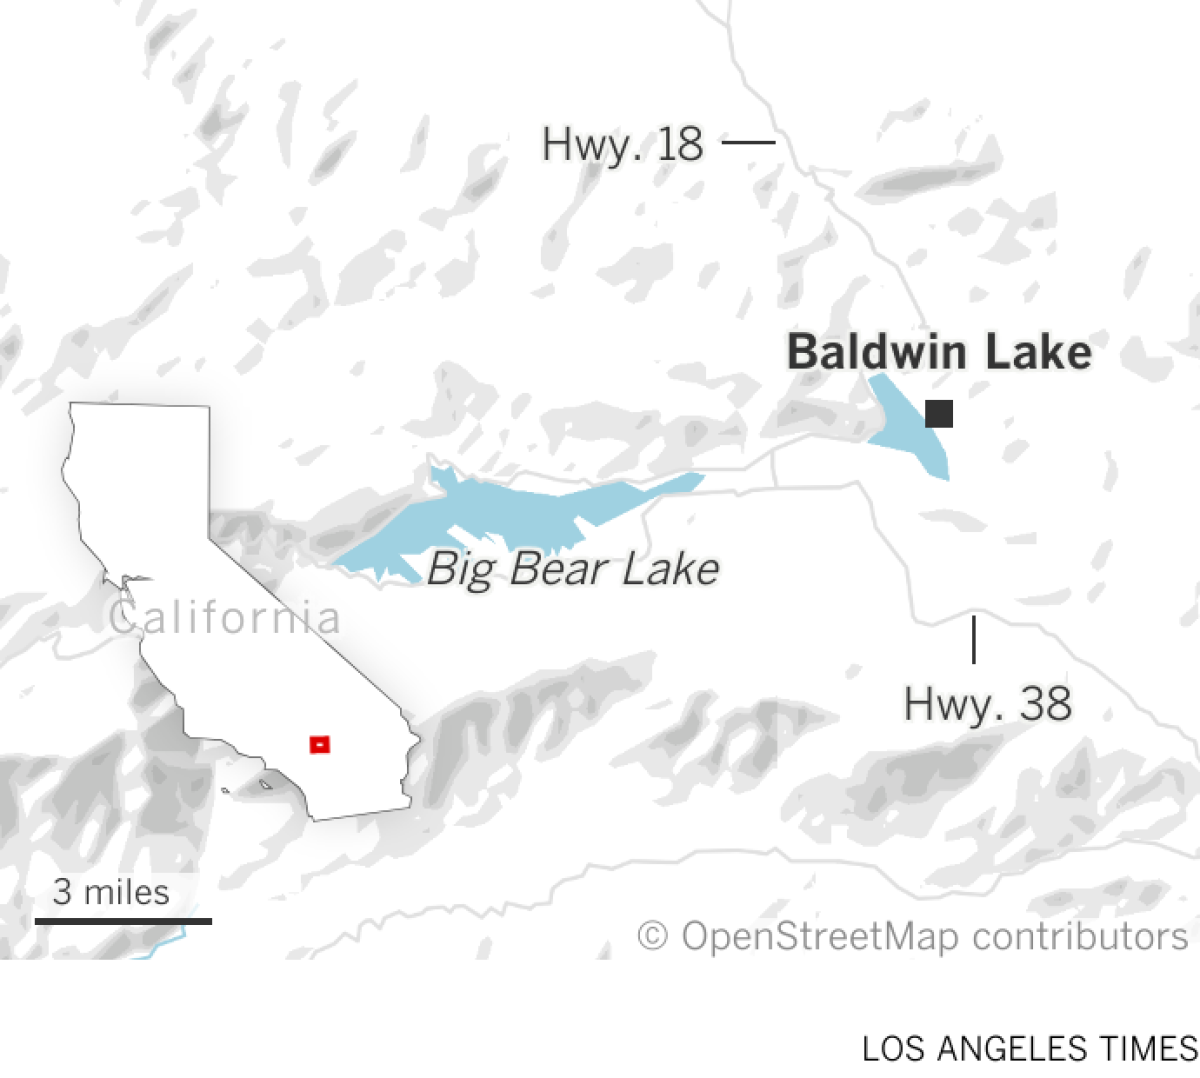 Map shows location of Baldwin Lake, which is near Big Bear Lake in Southern California.